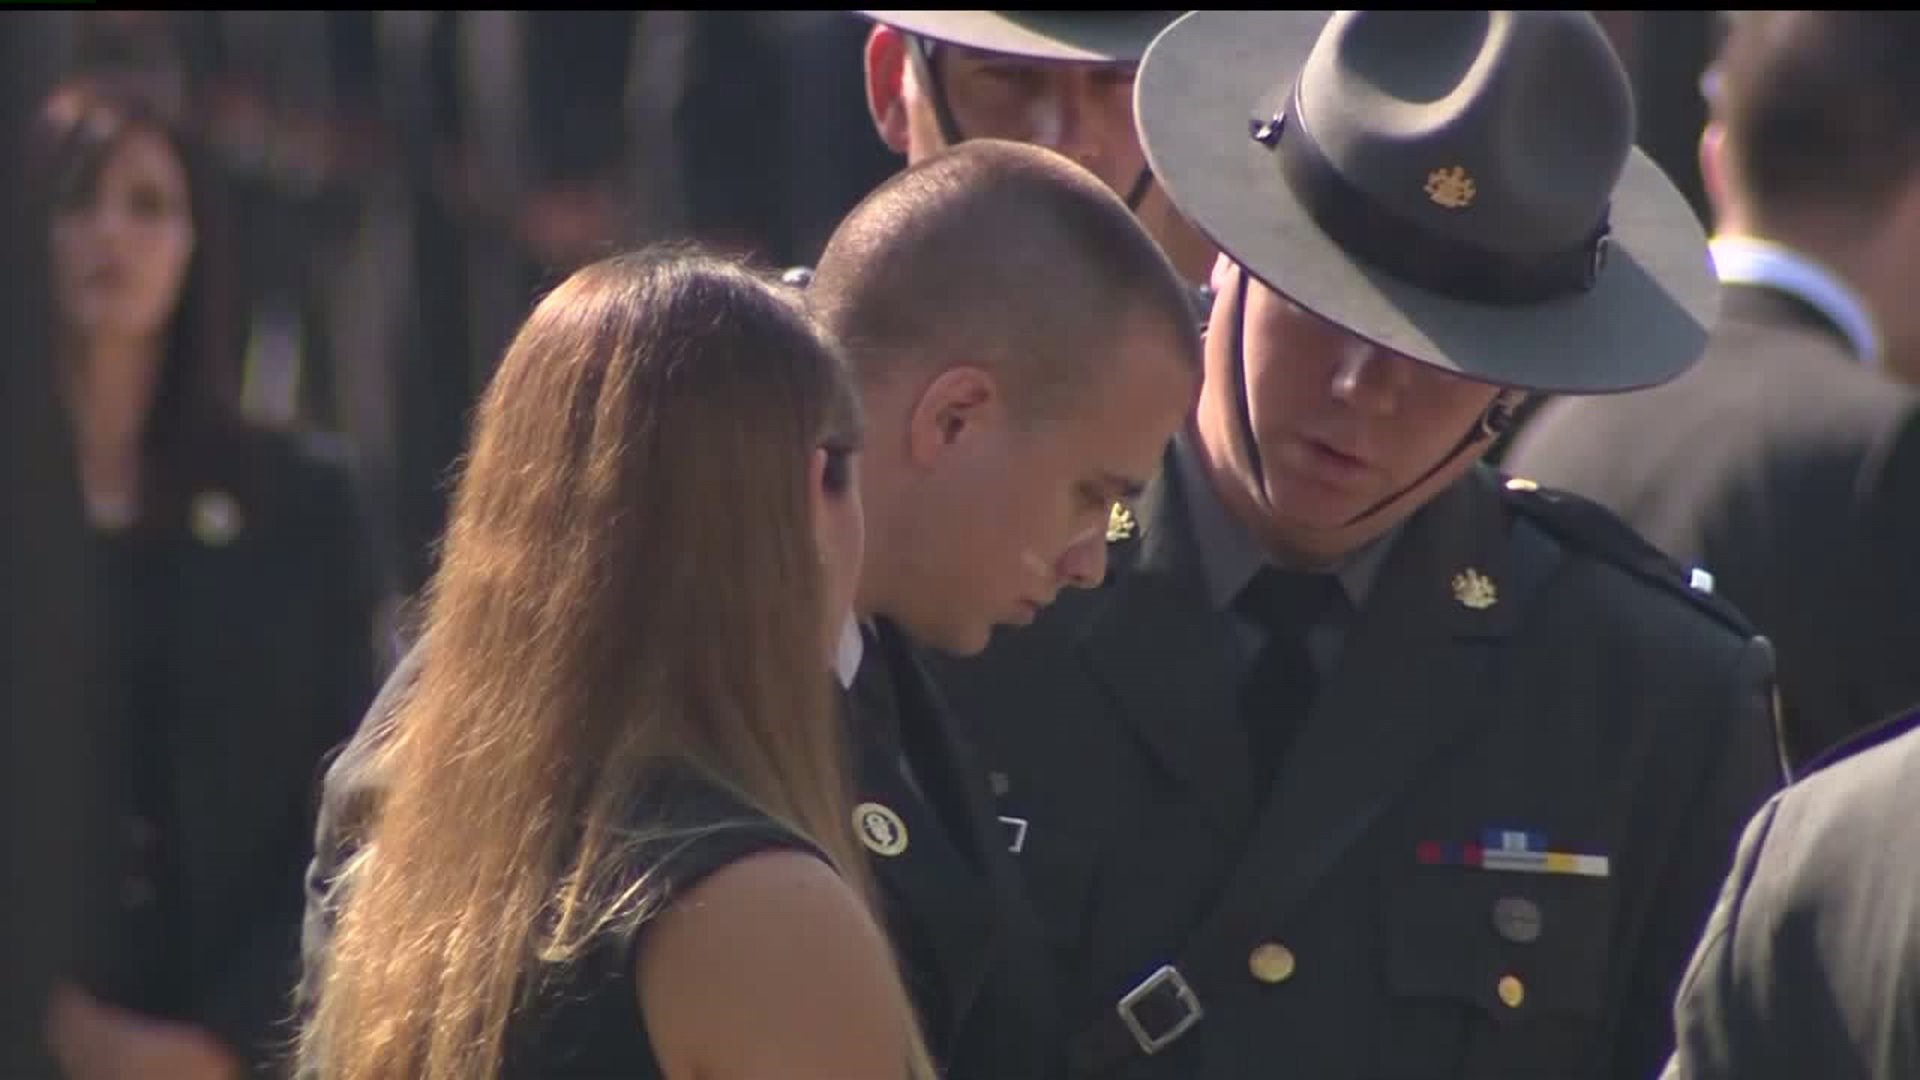 The PA state police are holding a public memorial service today honoring those that have lost their lives in the line of duty